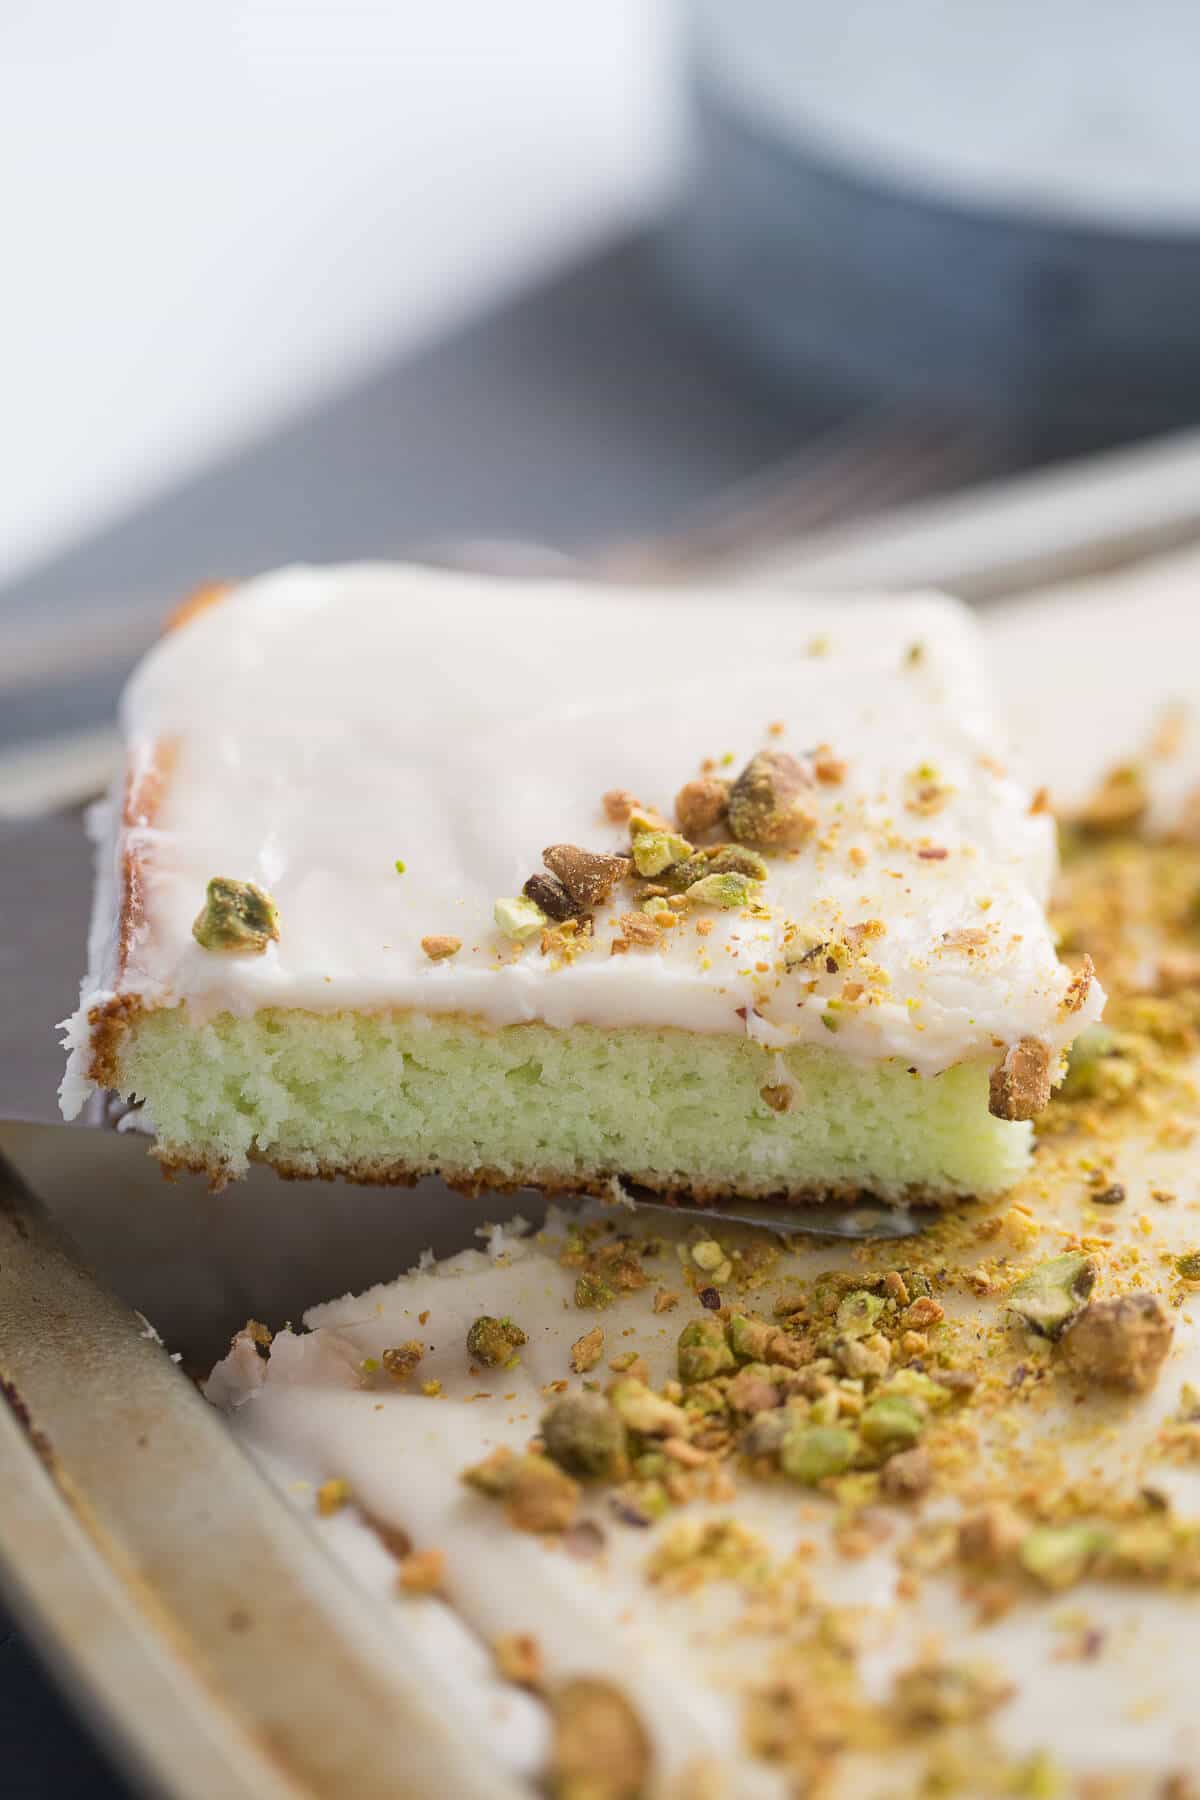 You are going to love this pistachio pudding cake. The simple vanilla frosting is the perfect compliment!